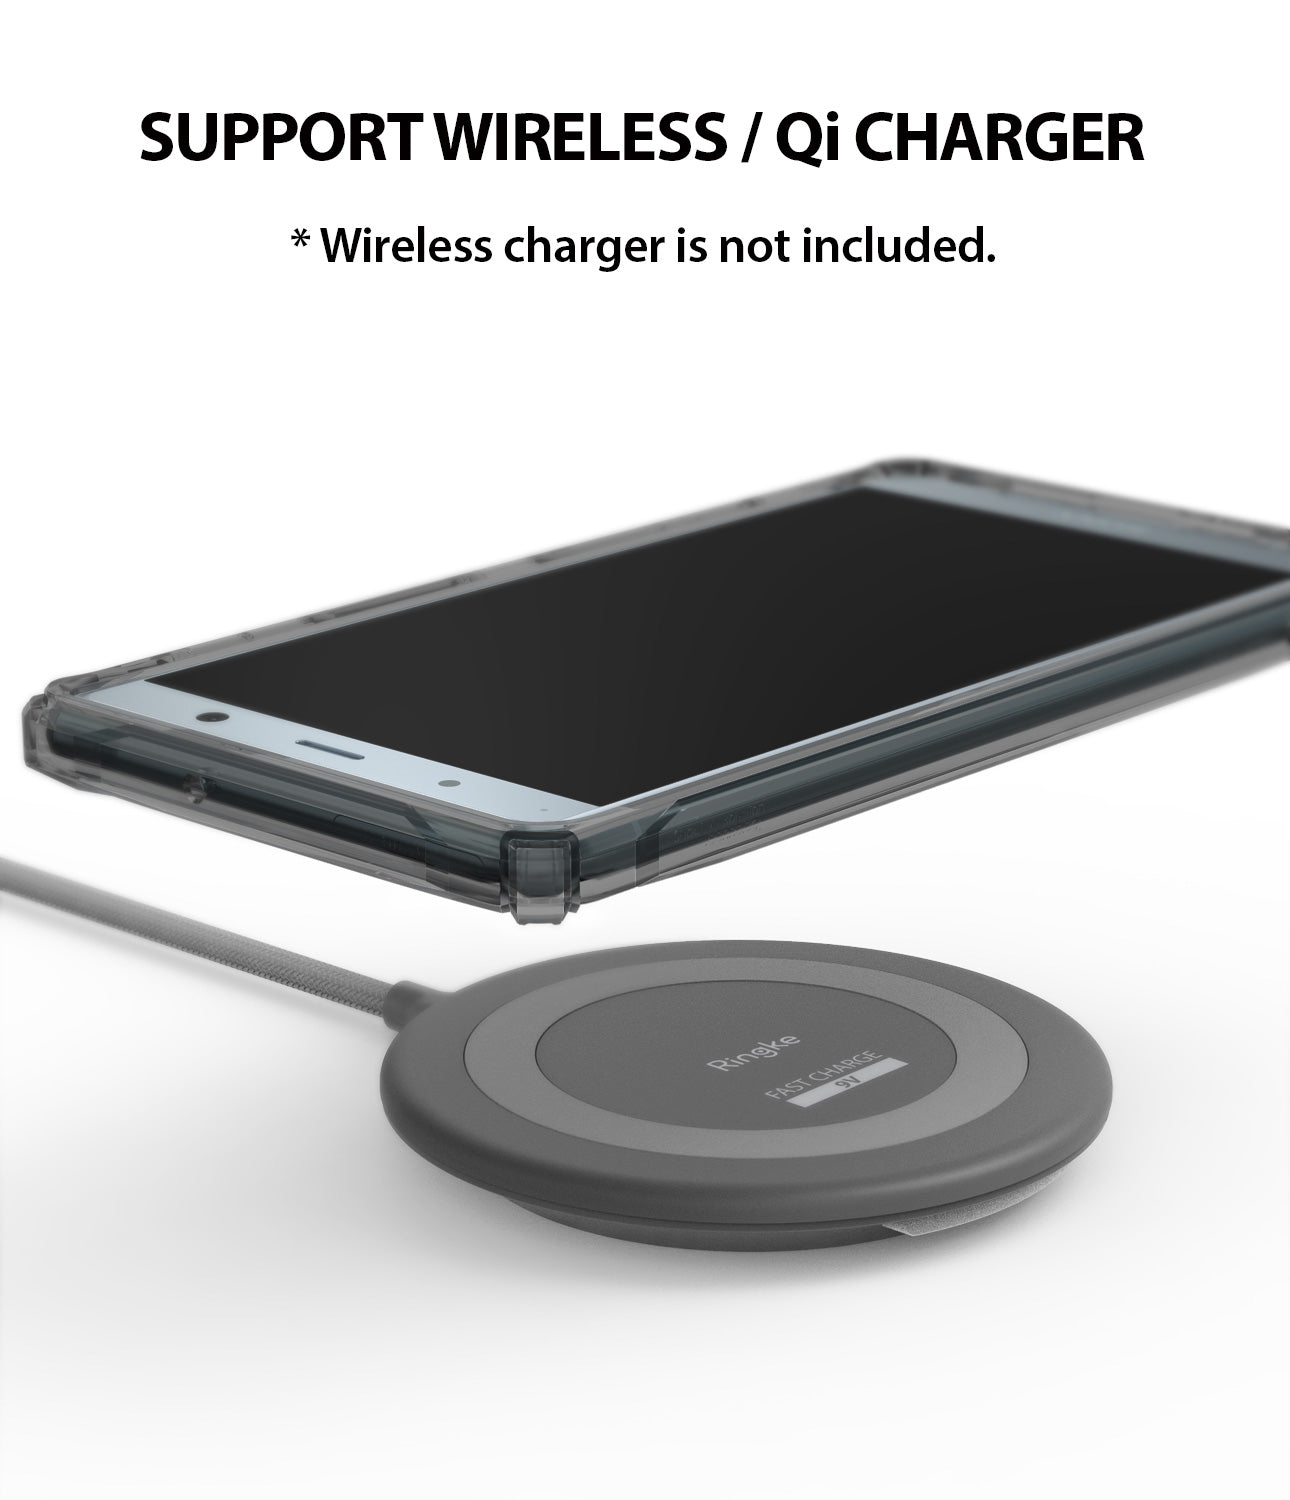 support wireless / qi charge